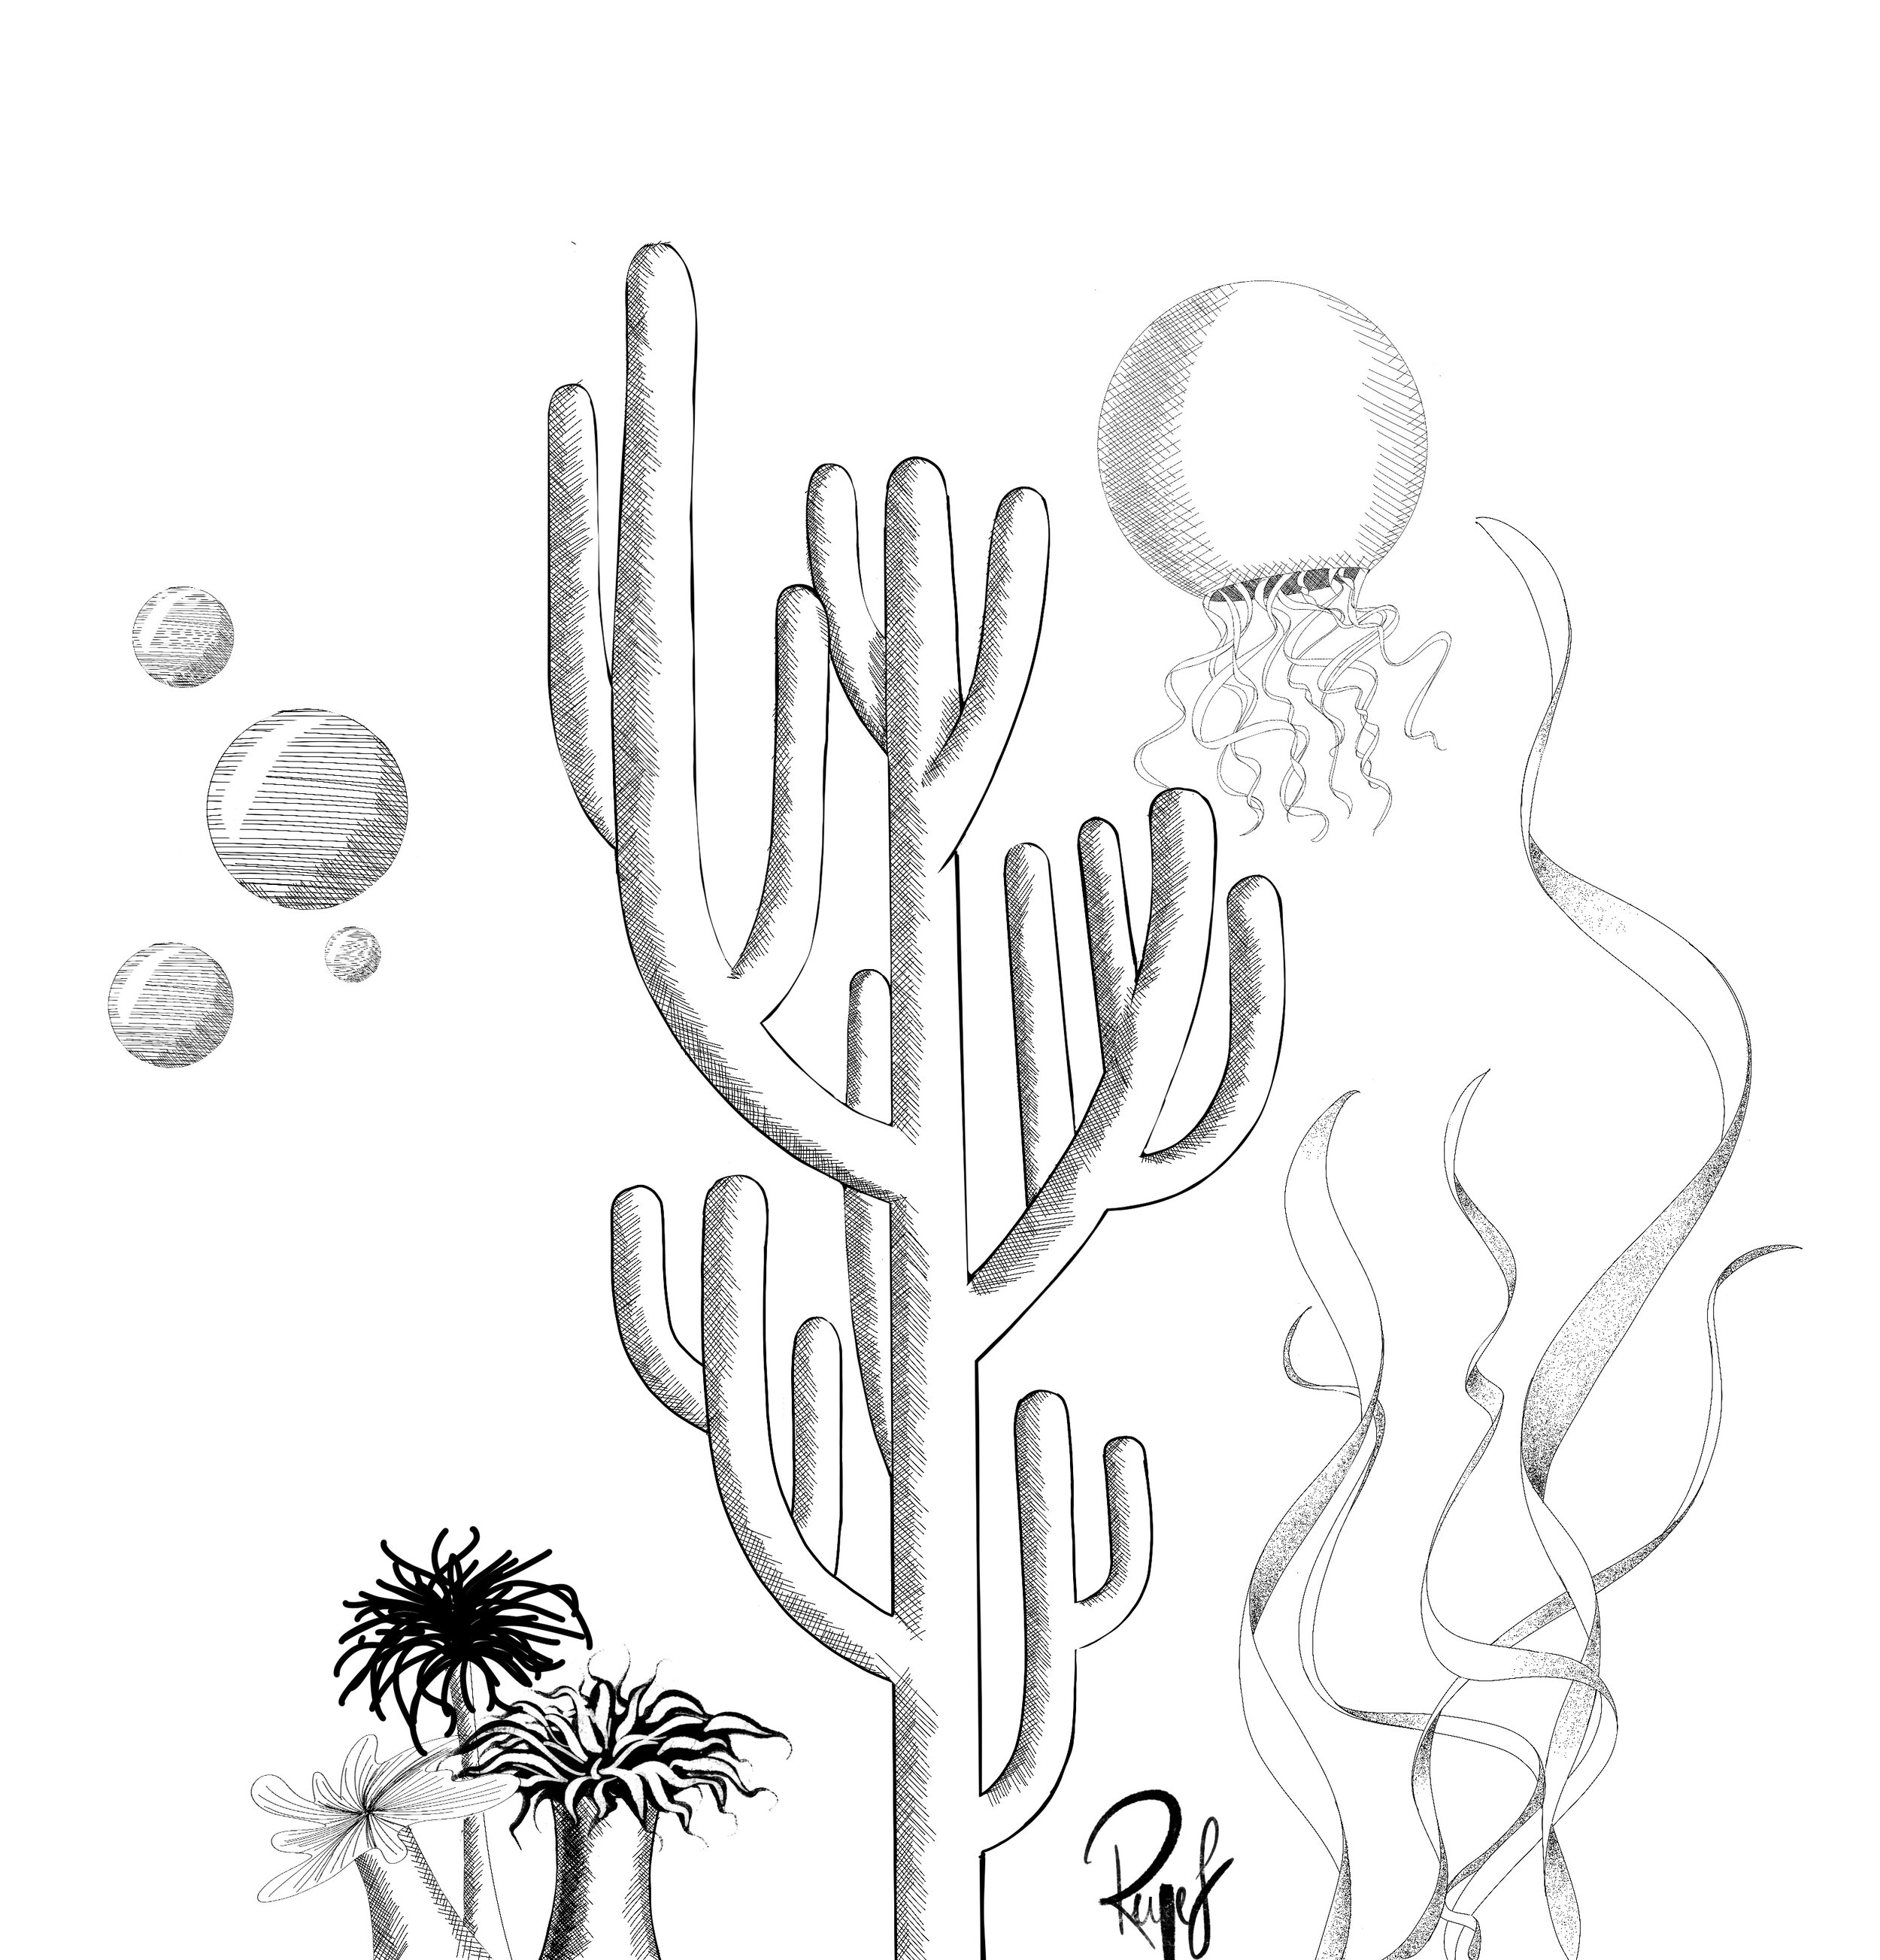 Day 20: Coral